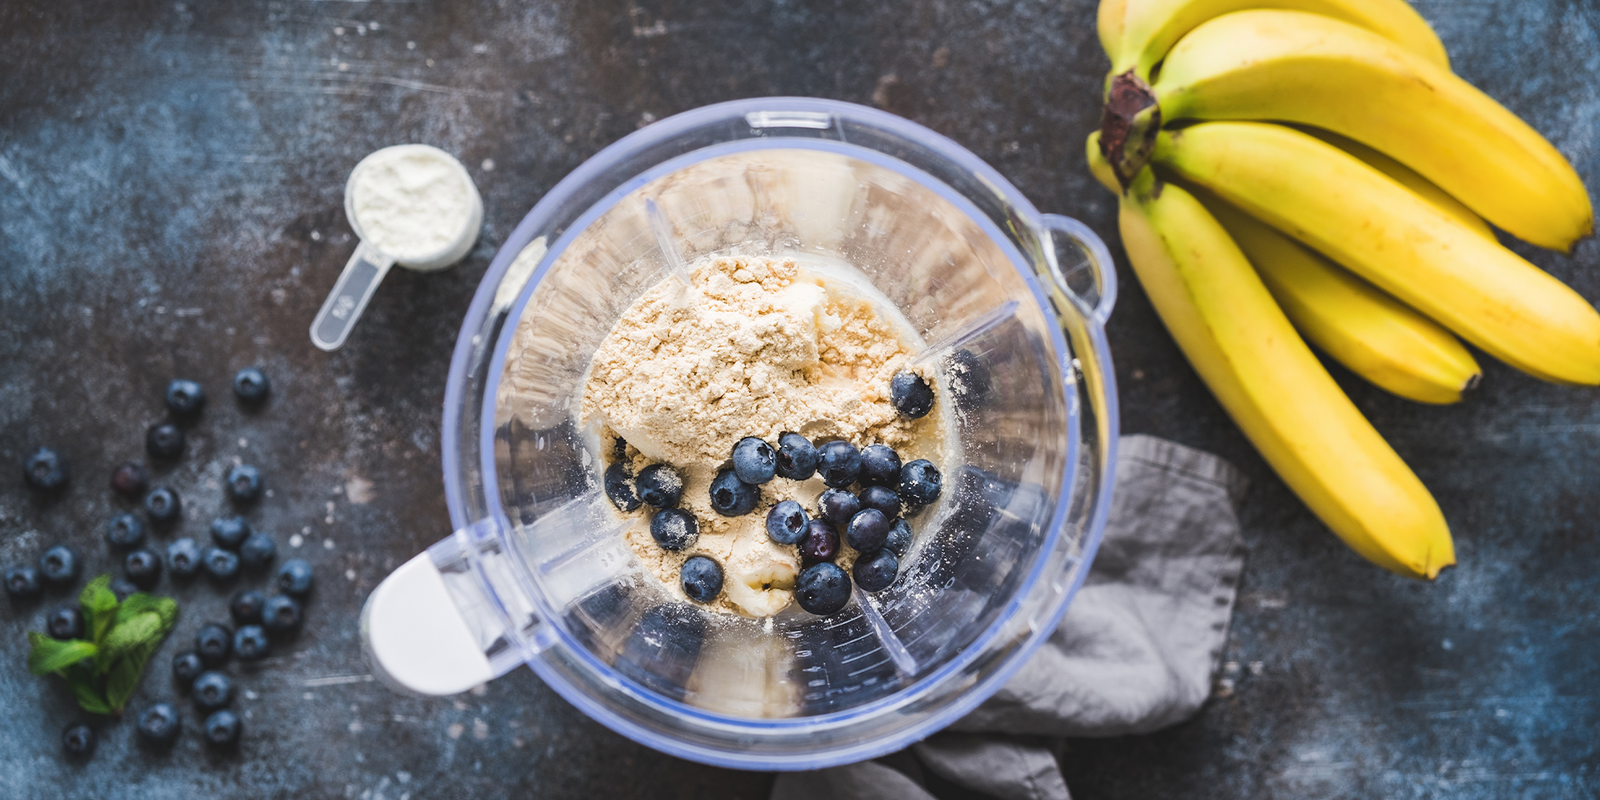 Whey vs. Plant protein: which is better?